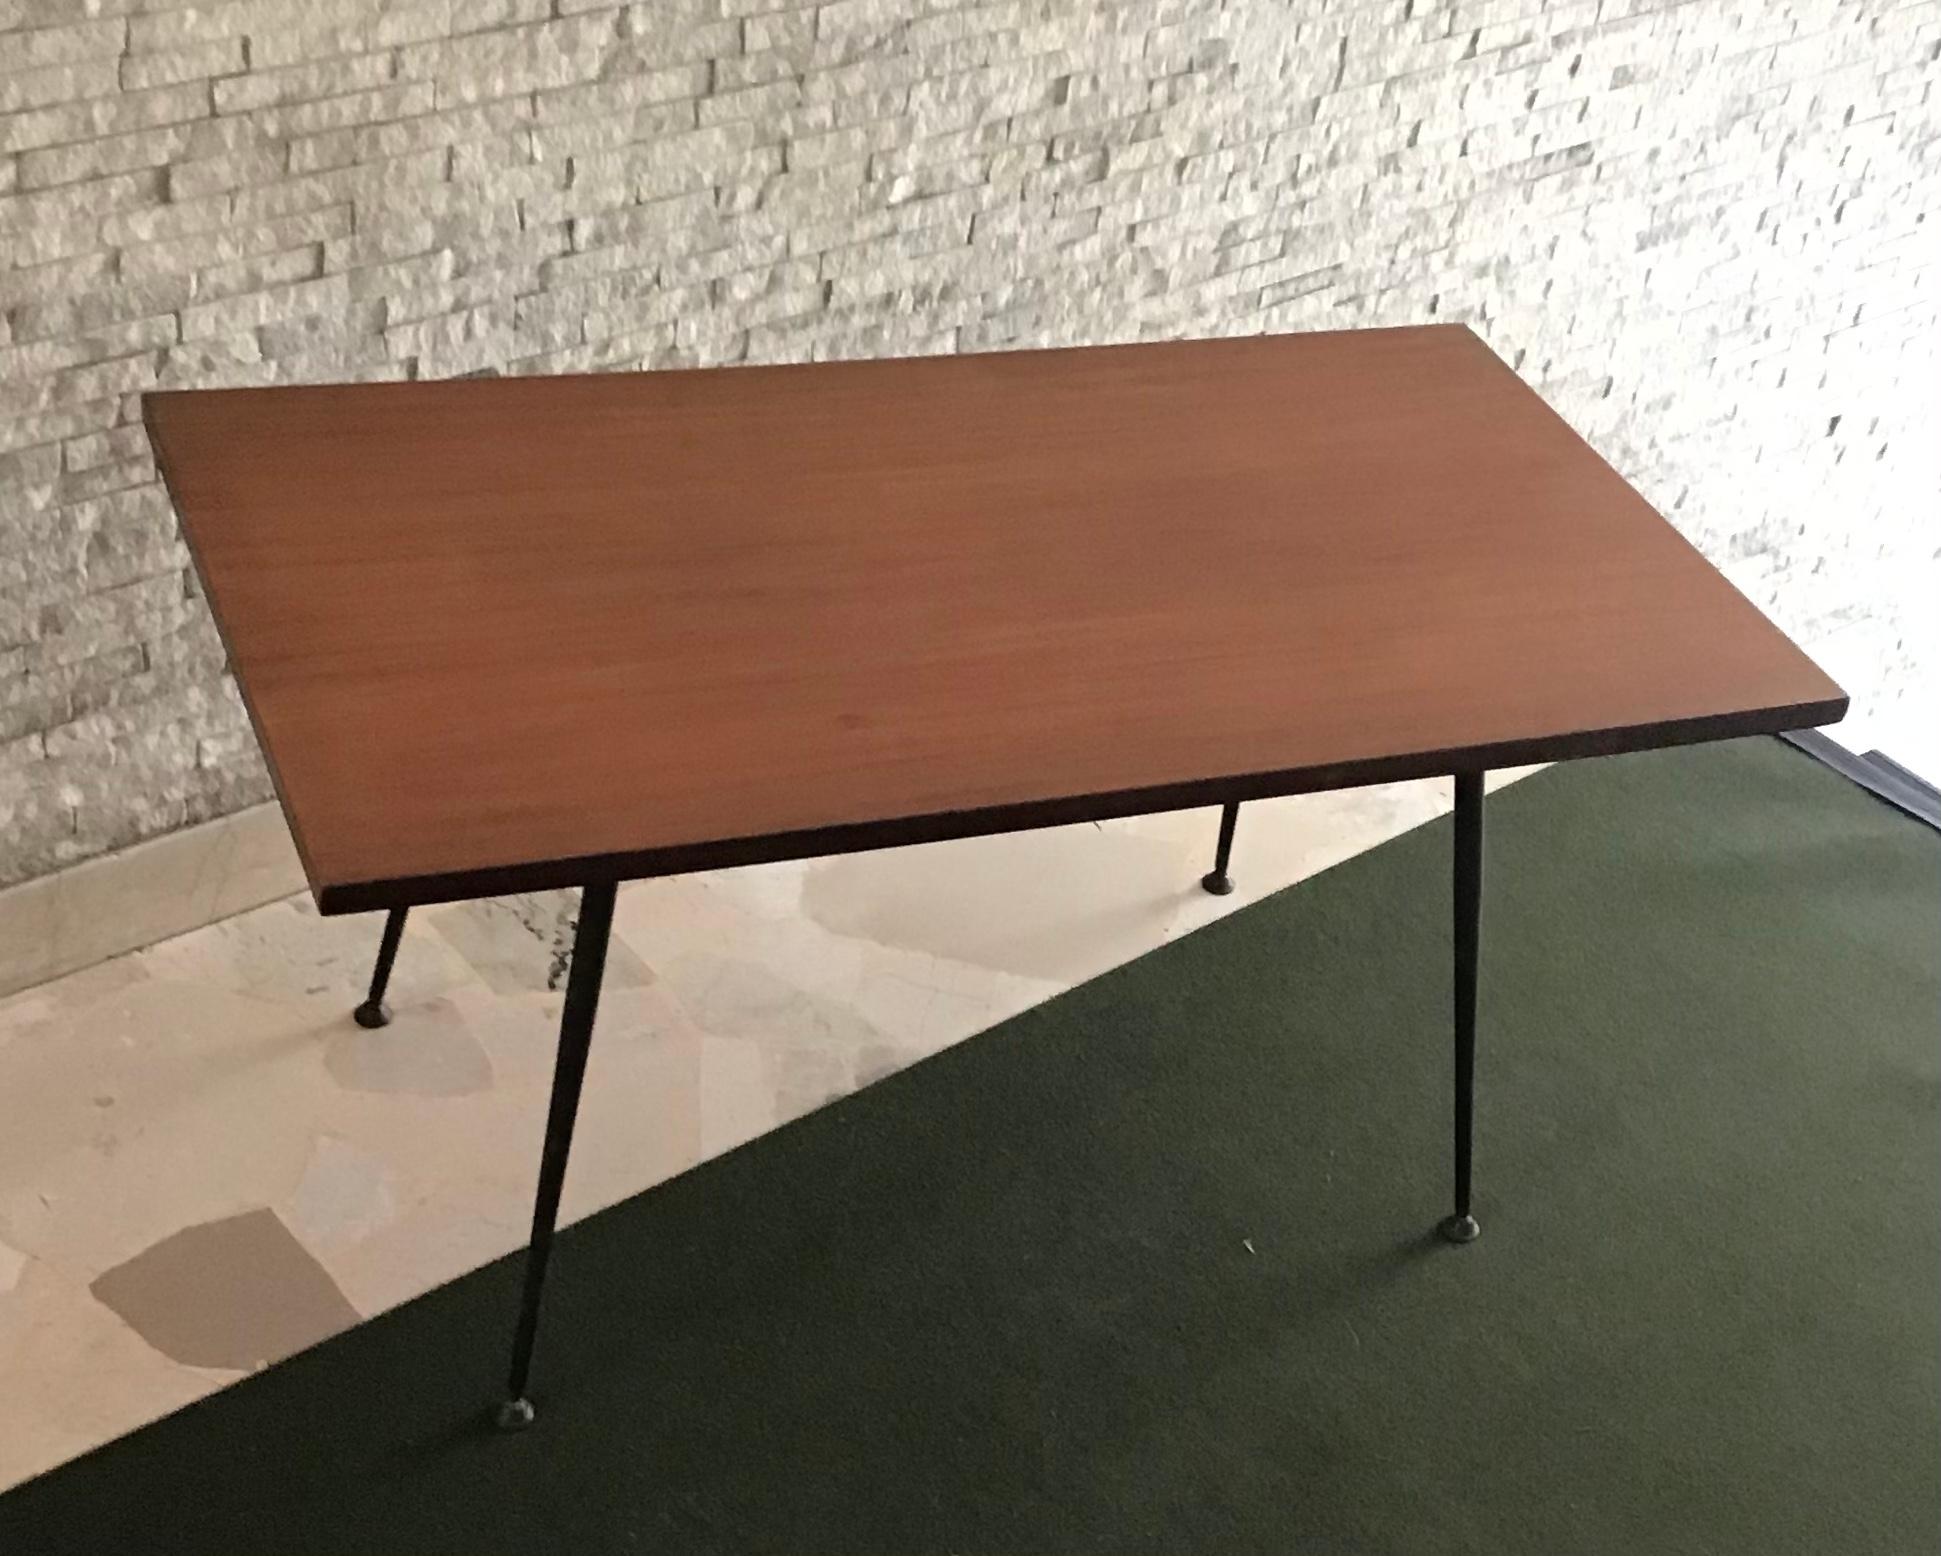 Mid-20th Century Jean Prouvé “Stile“ Coffee Table Wood Brass Painted Steel 1954 France For Sale